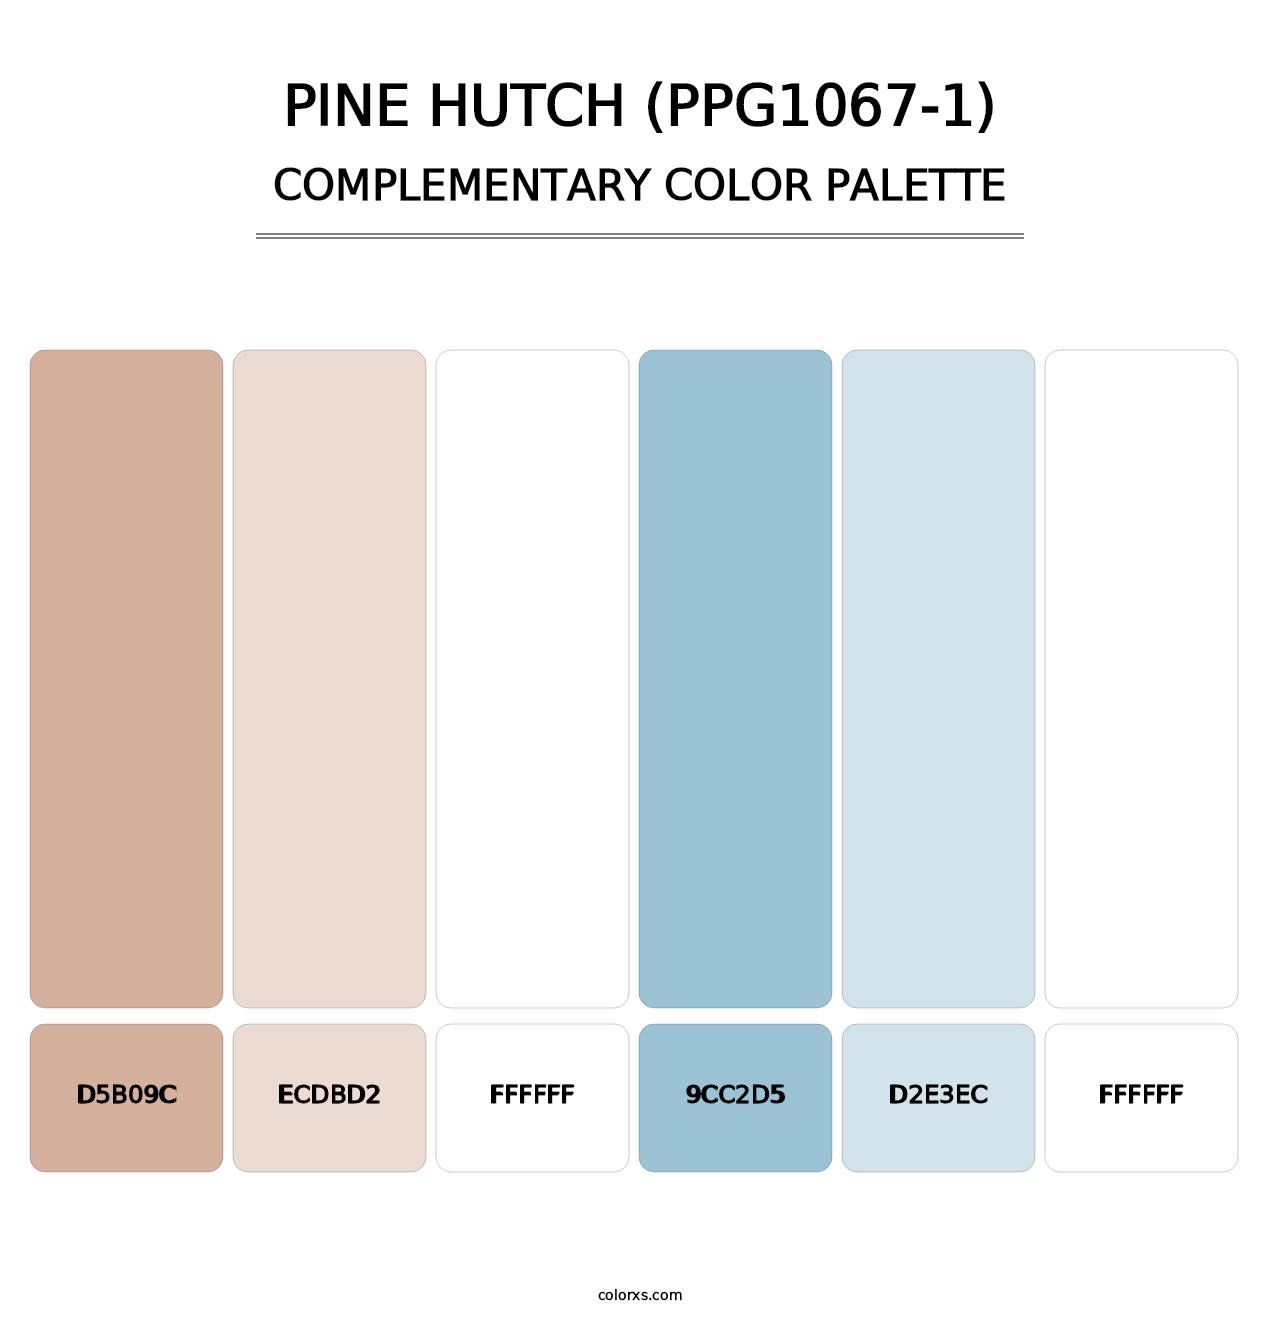 Pine Hutch (PPG1067-1) - Complementary Color Palette